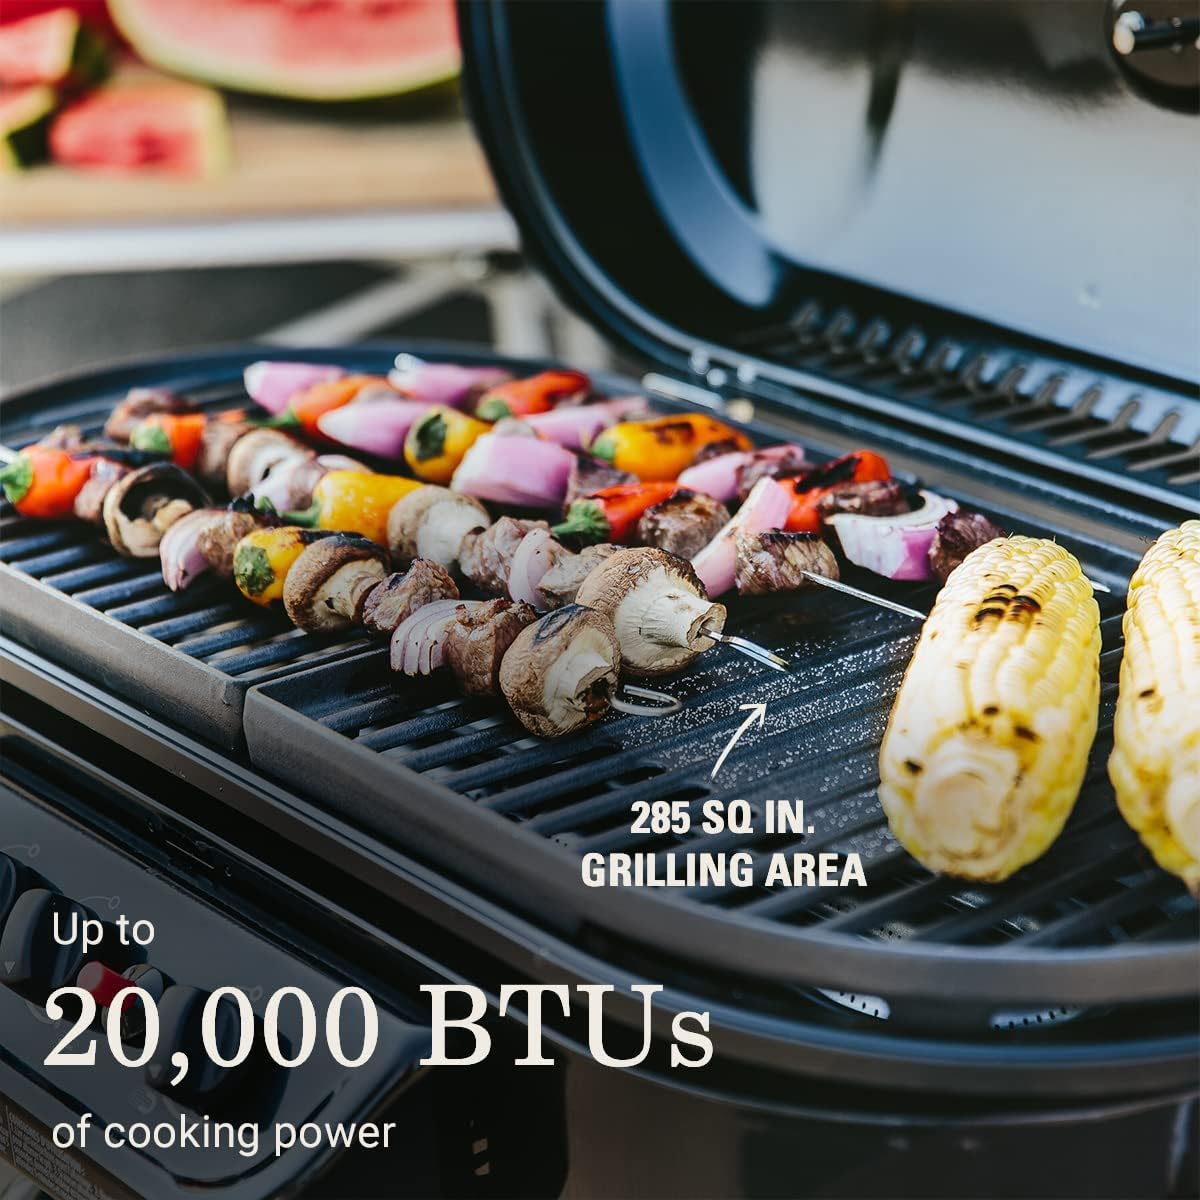 Grilling Enthusiasts: Master the Coleman RoadTrip Xcursion Grill with these 10 Essential Tips